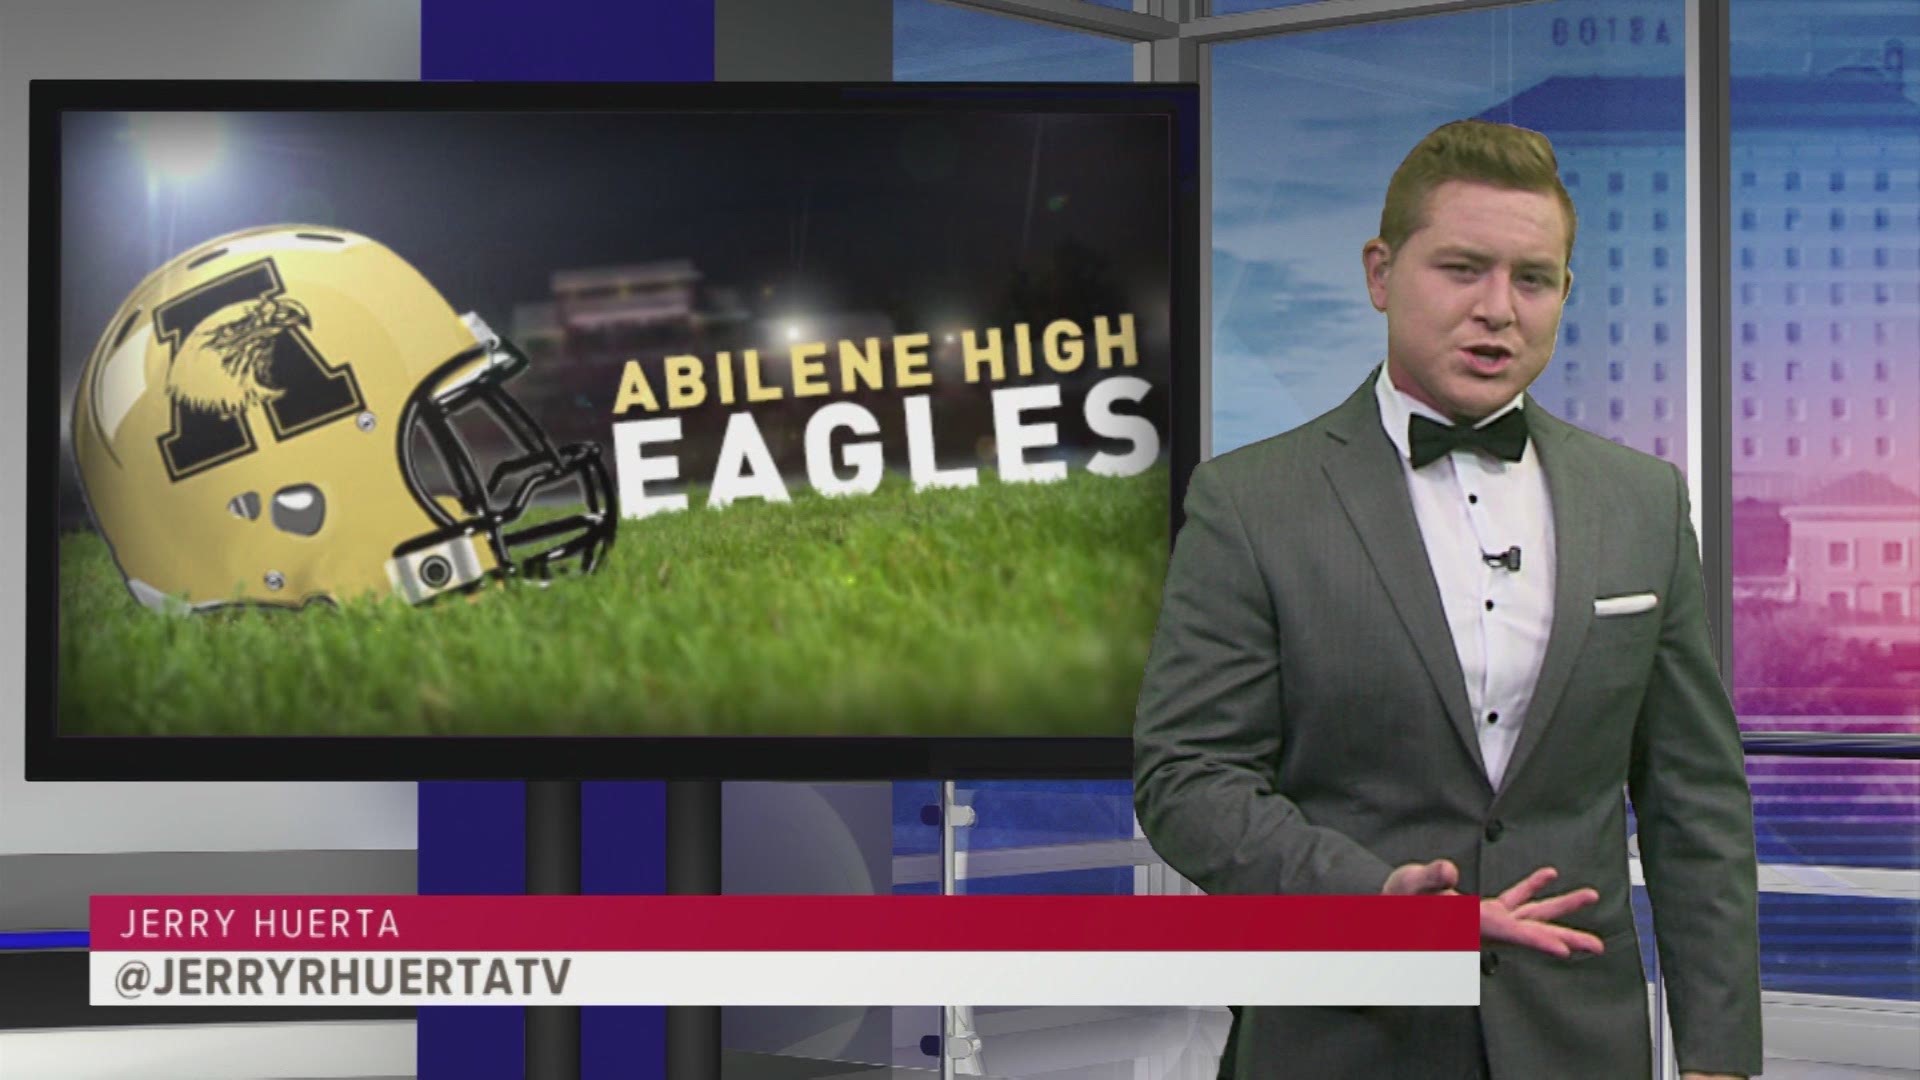 Abilene High will look to Eric Abbe as the newest starting quarterback for the Eagles. He won a tight battle over Kallin Sipe.